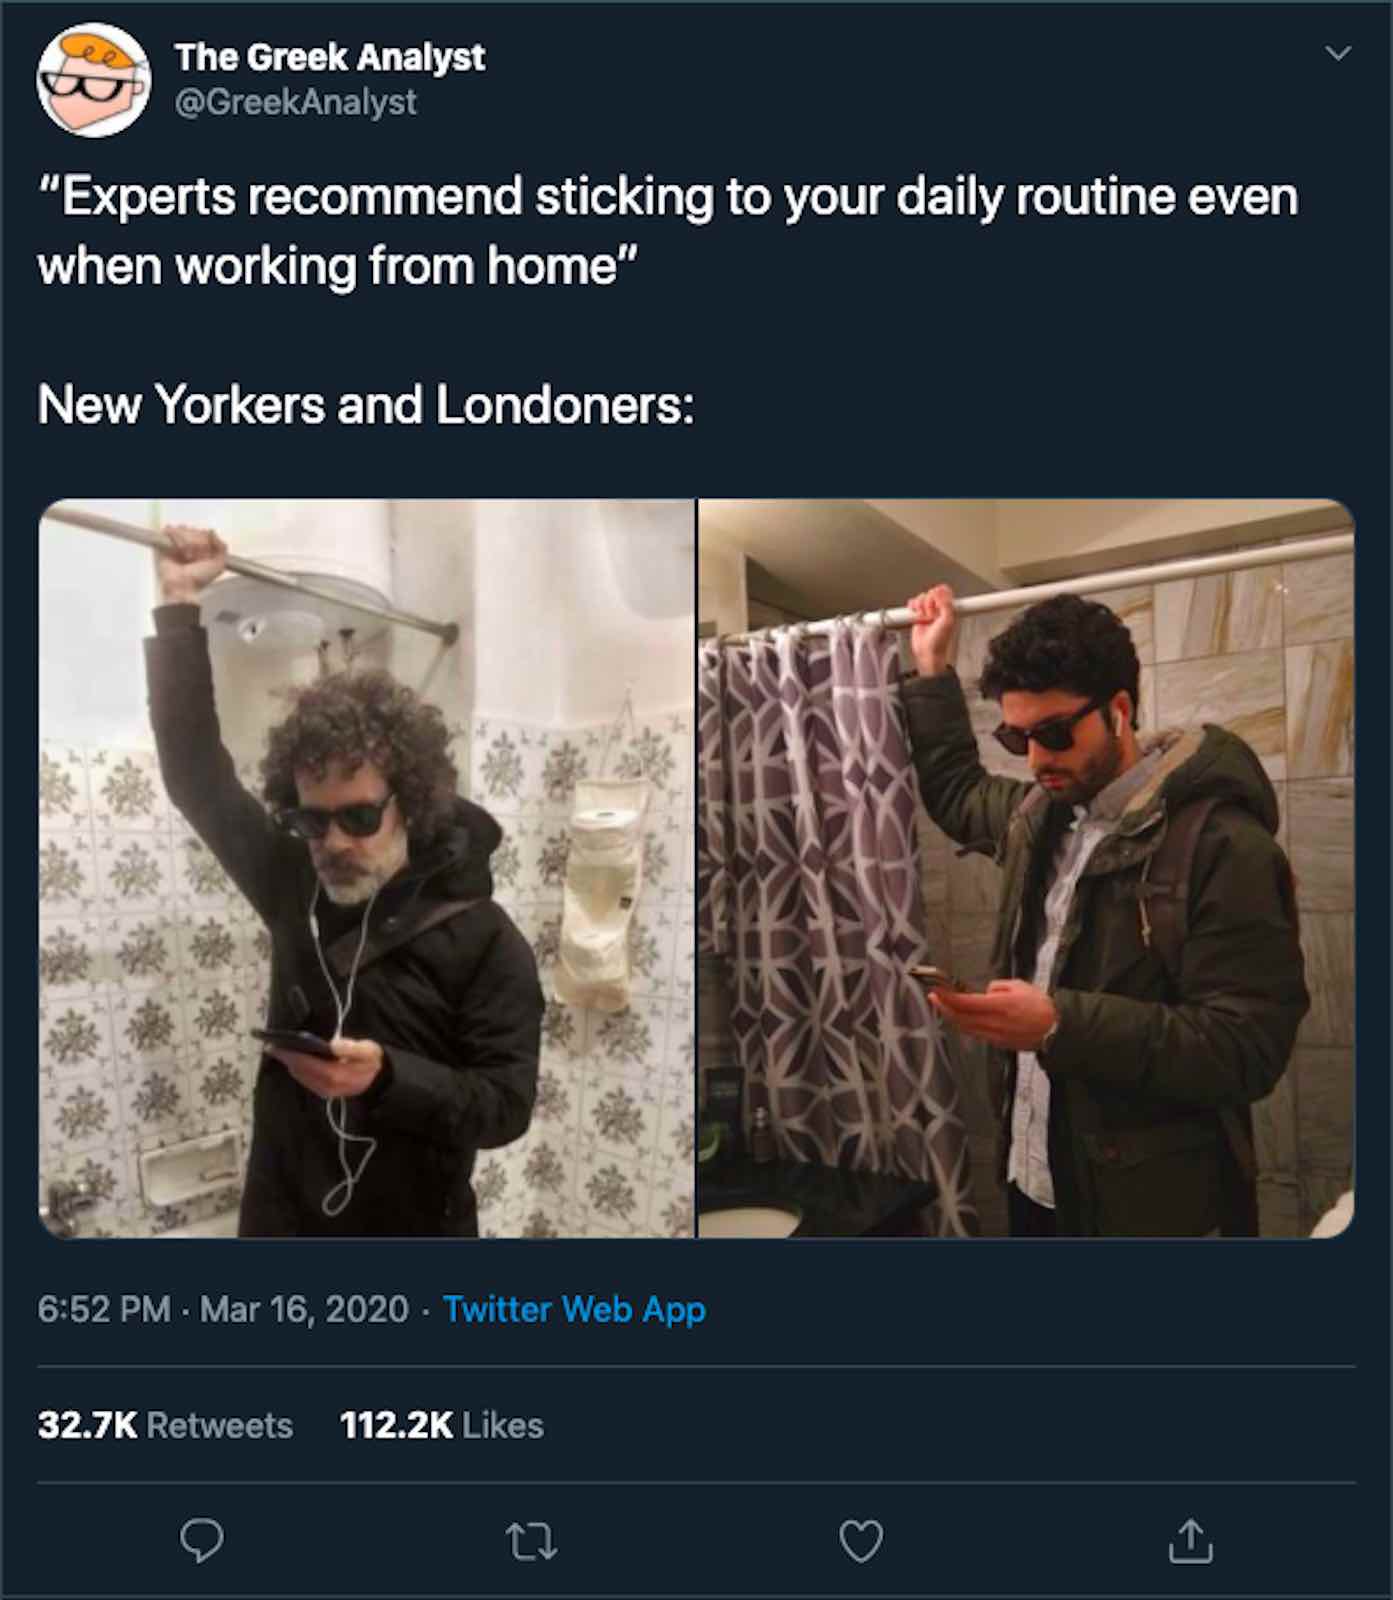 coronavirus 2020 memes - The Greek Analyst "Experts recommend sticking to your daily routine even when working from home" New Yorkers and Londoners Twitter Web App